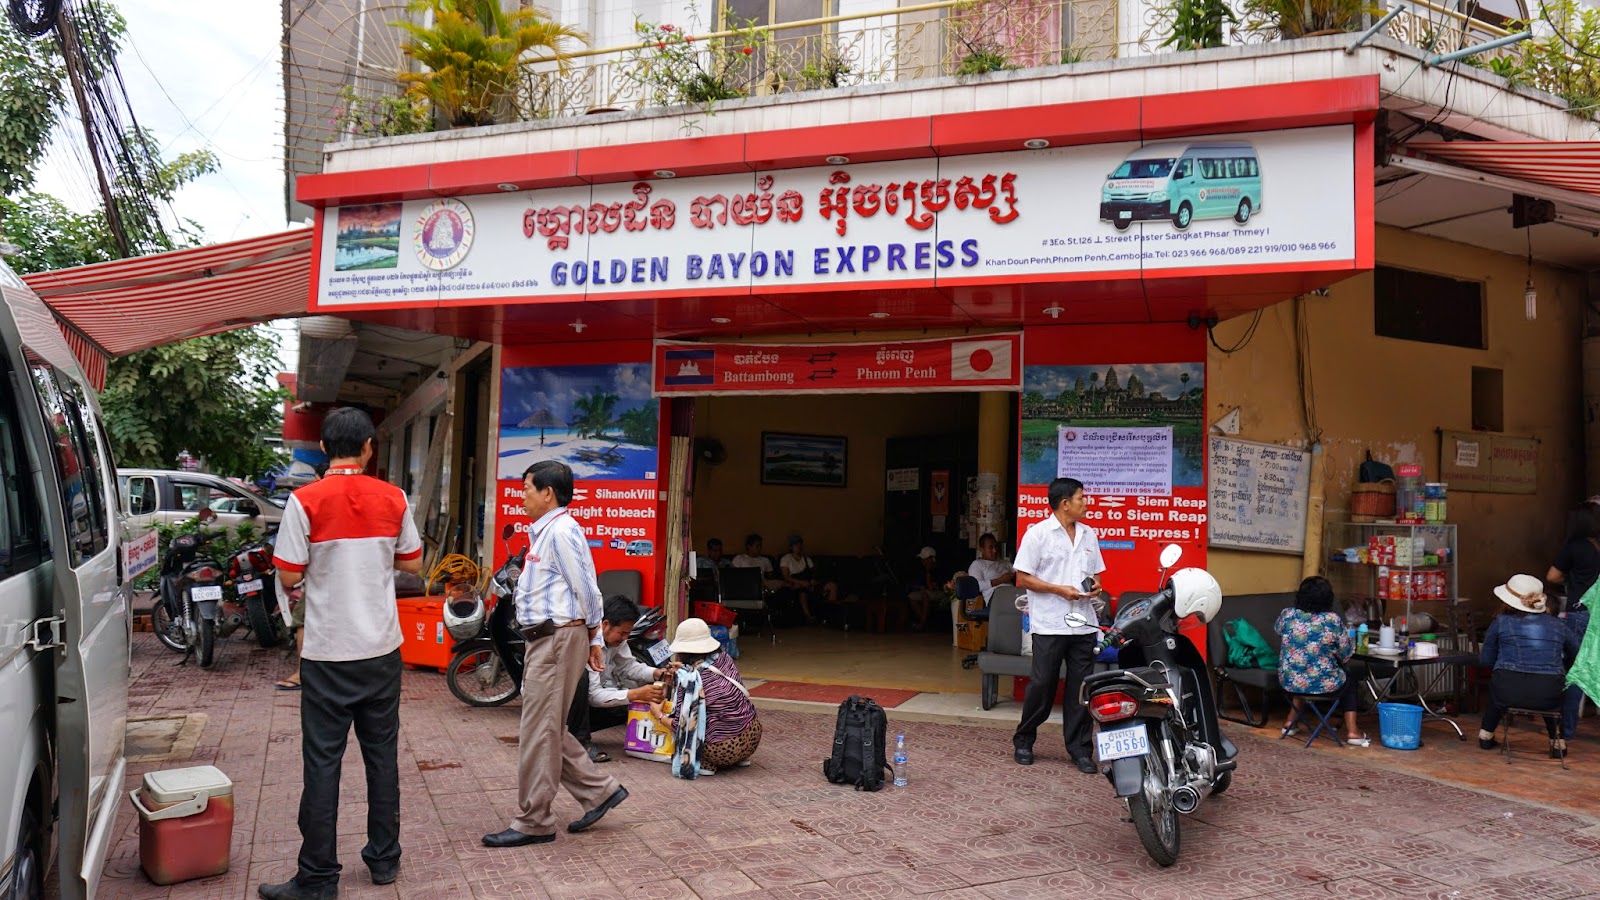 Golden Bayon Express office, where I waited for the minivan which will take me to Battambang